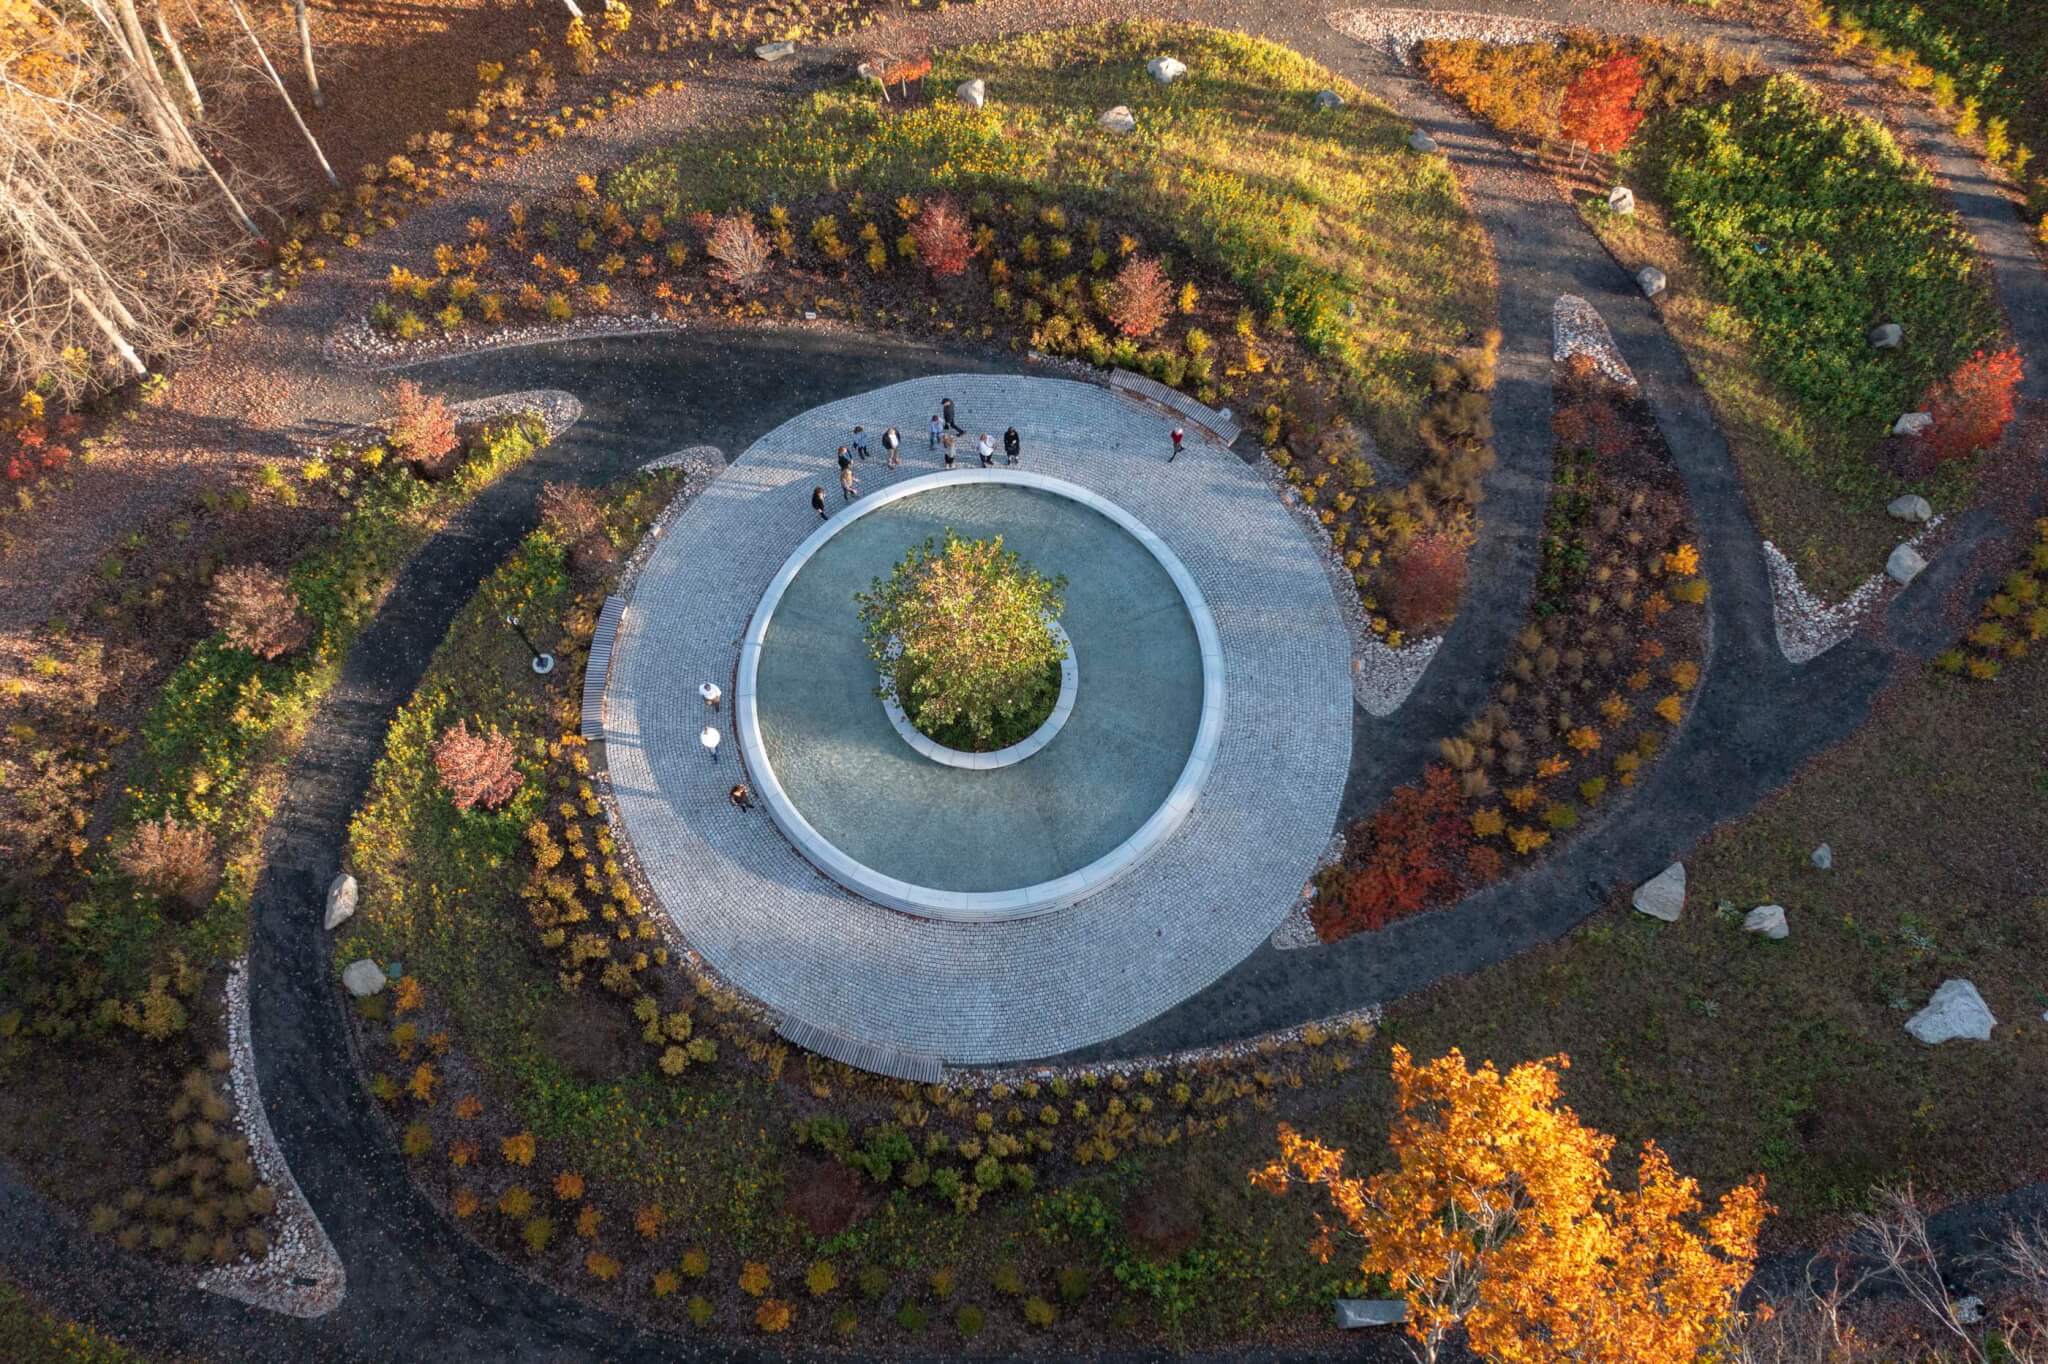 Aerial view of people gathered around a circular reflecting pond with a tree in the middle